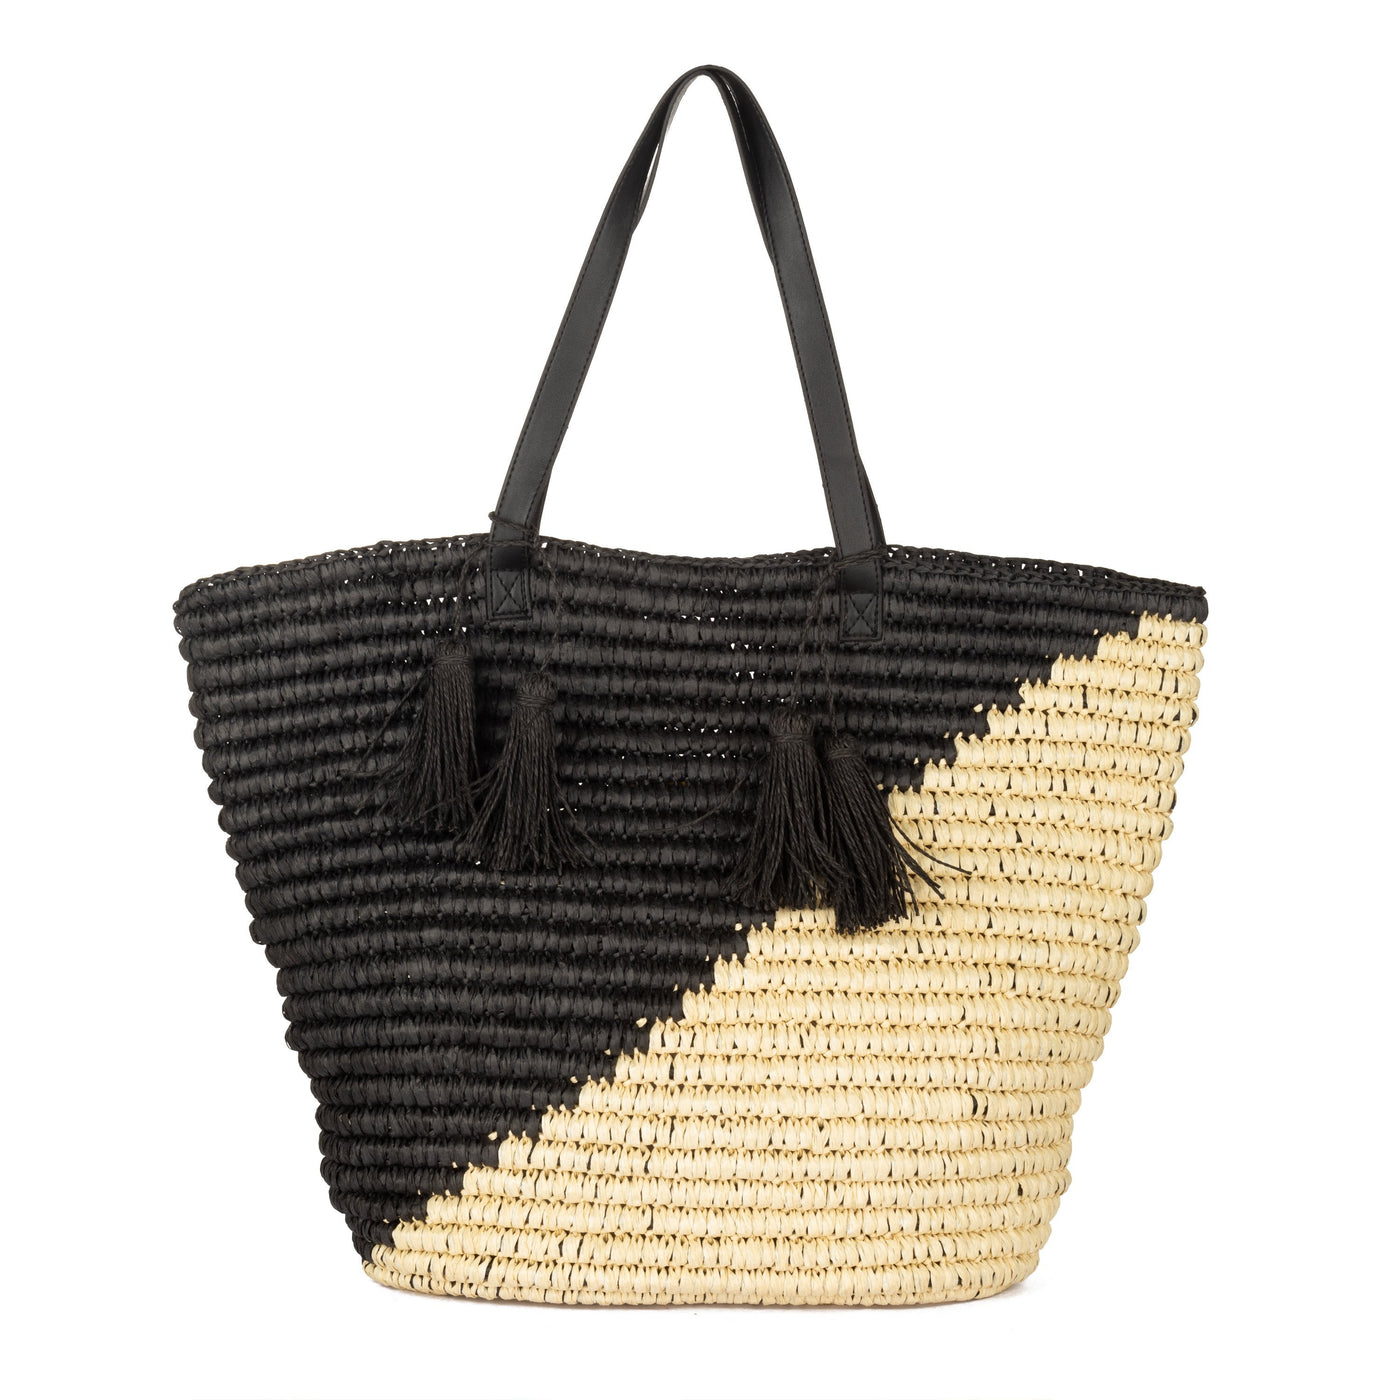 TOTE - Color Blocked Tote With Leather Handles & Paper Tassels